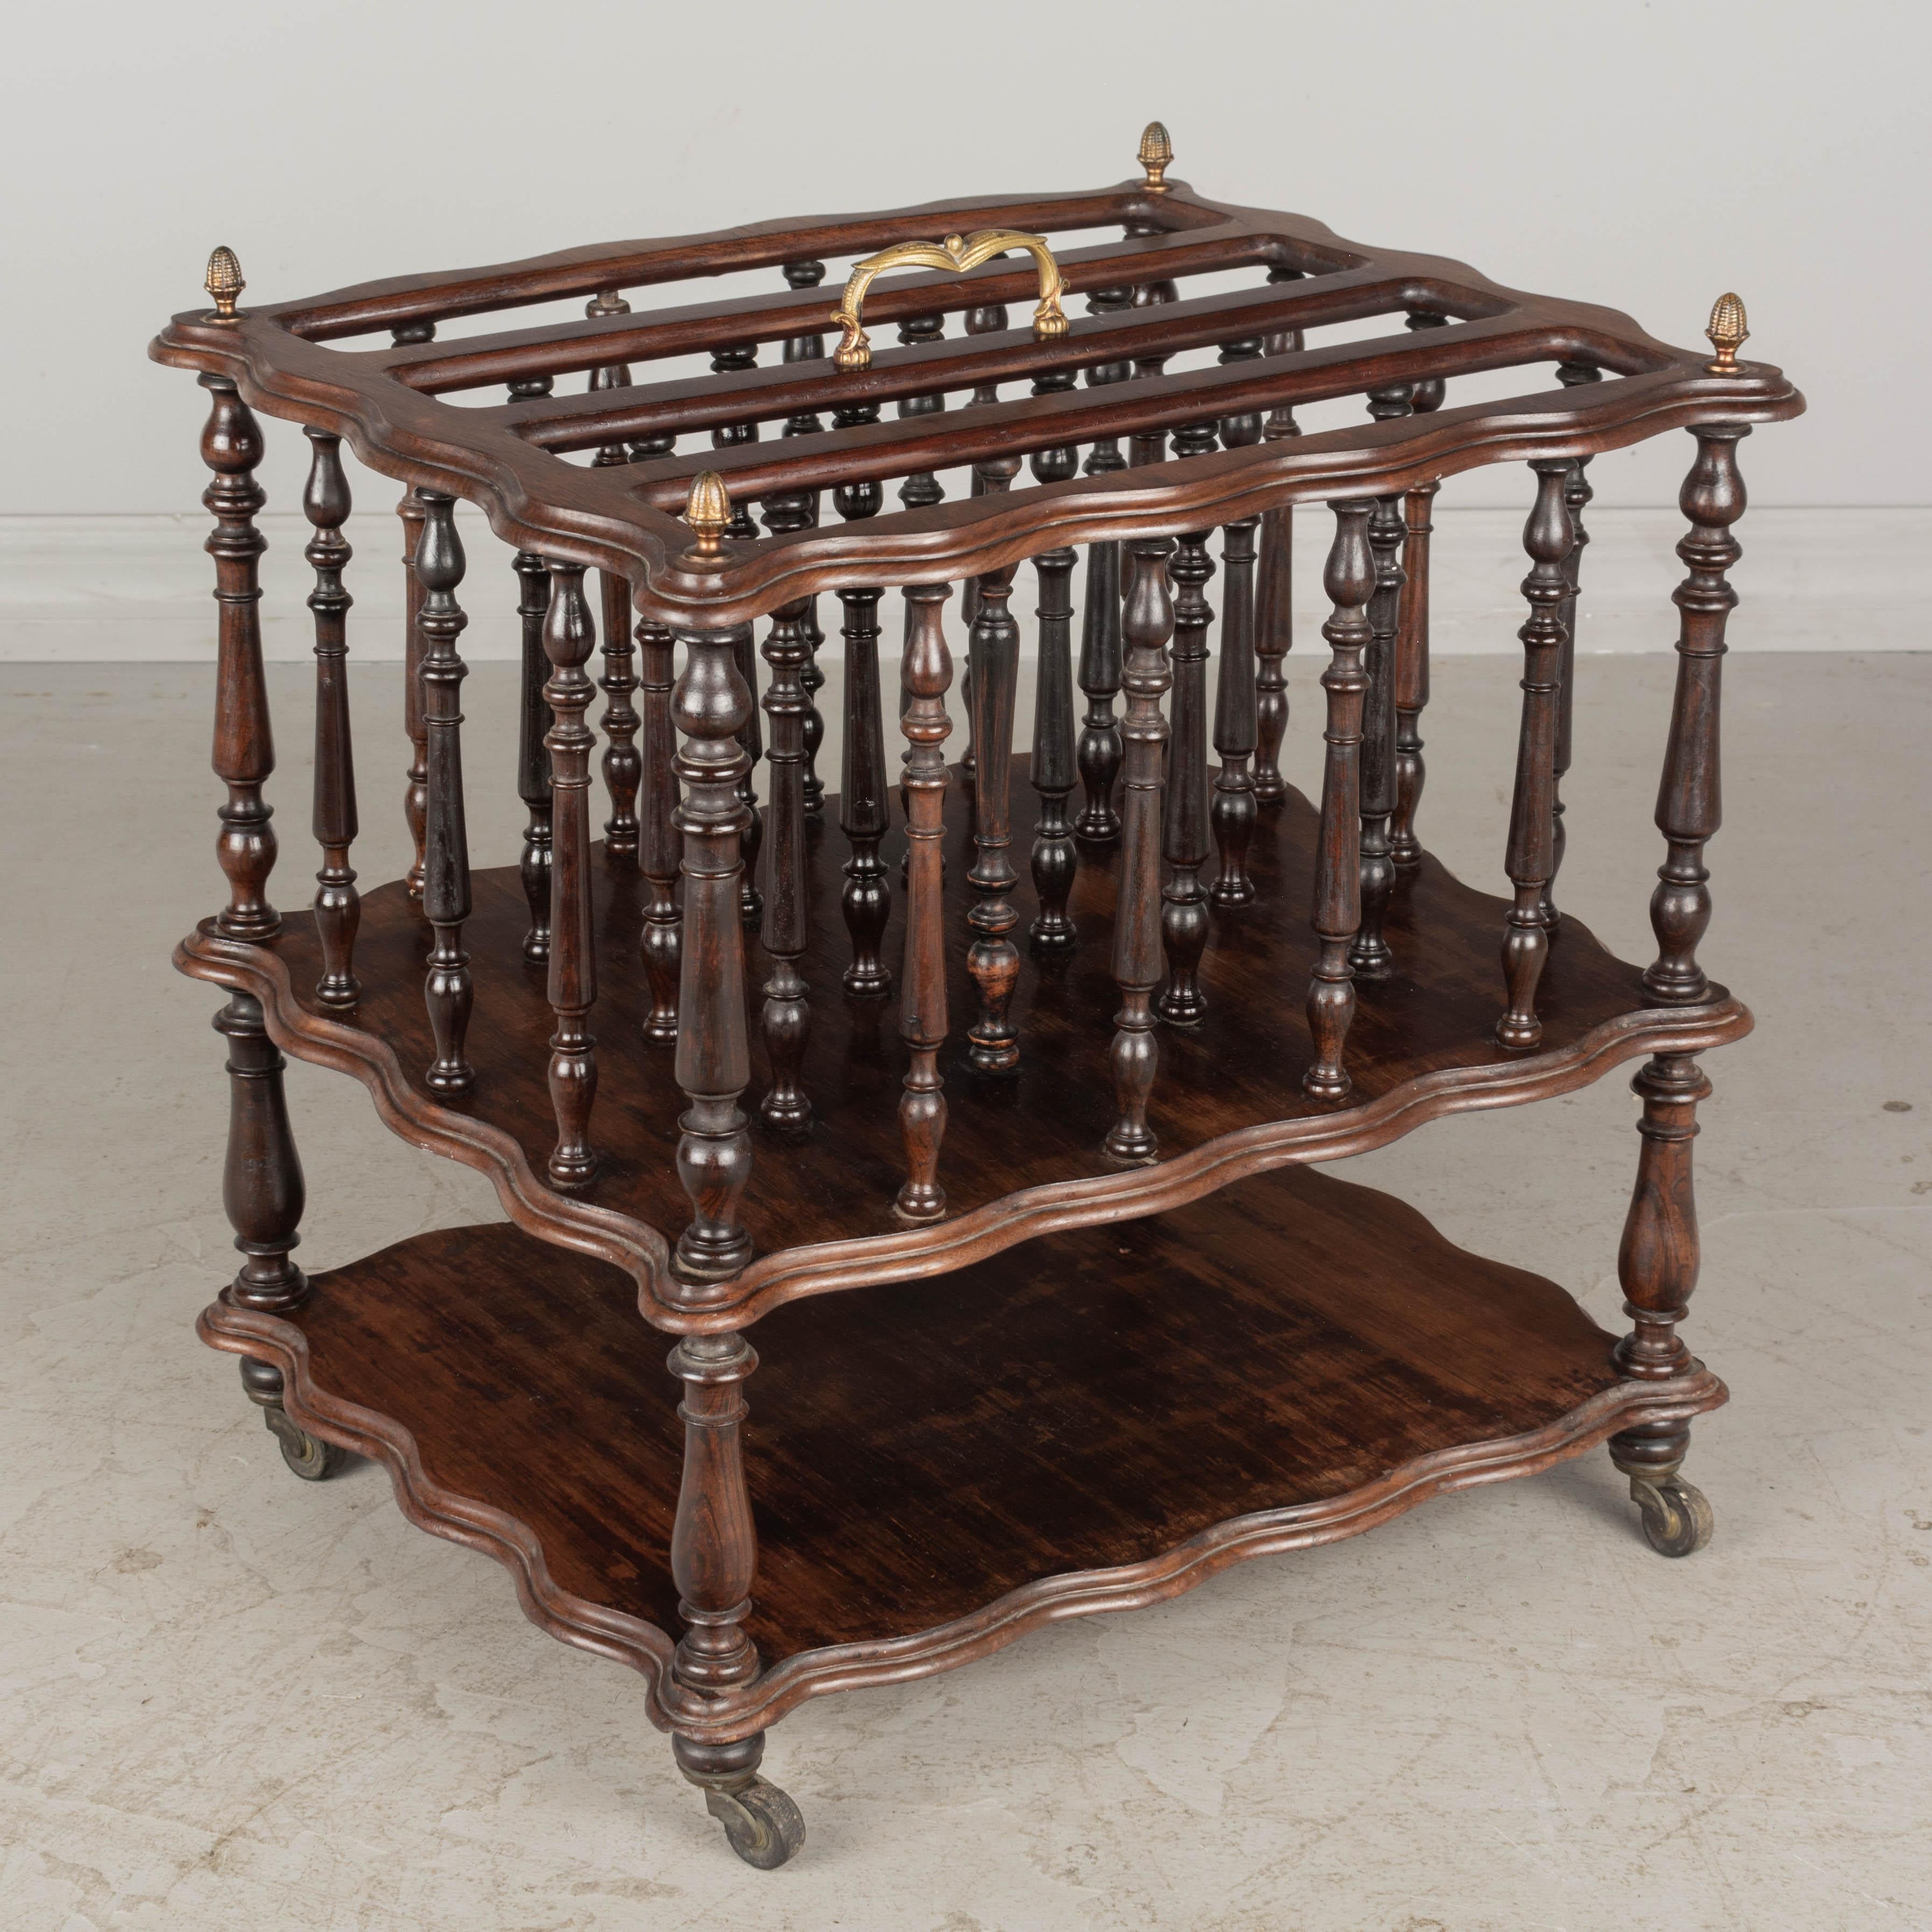 A fine 19th century English Regency style rosewood four-section canterbury for sheet music, or magazine rack. Highly decorative turned spindle frame with cast brass finials and carrying handle. Lower shelf with castors. Original finish.